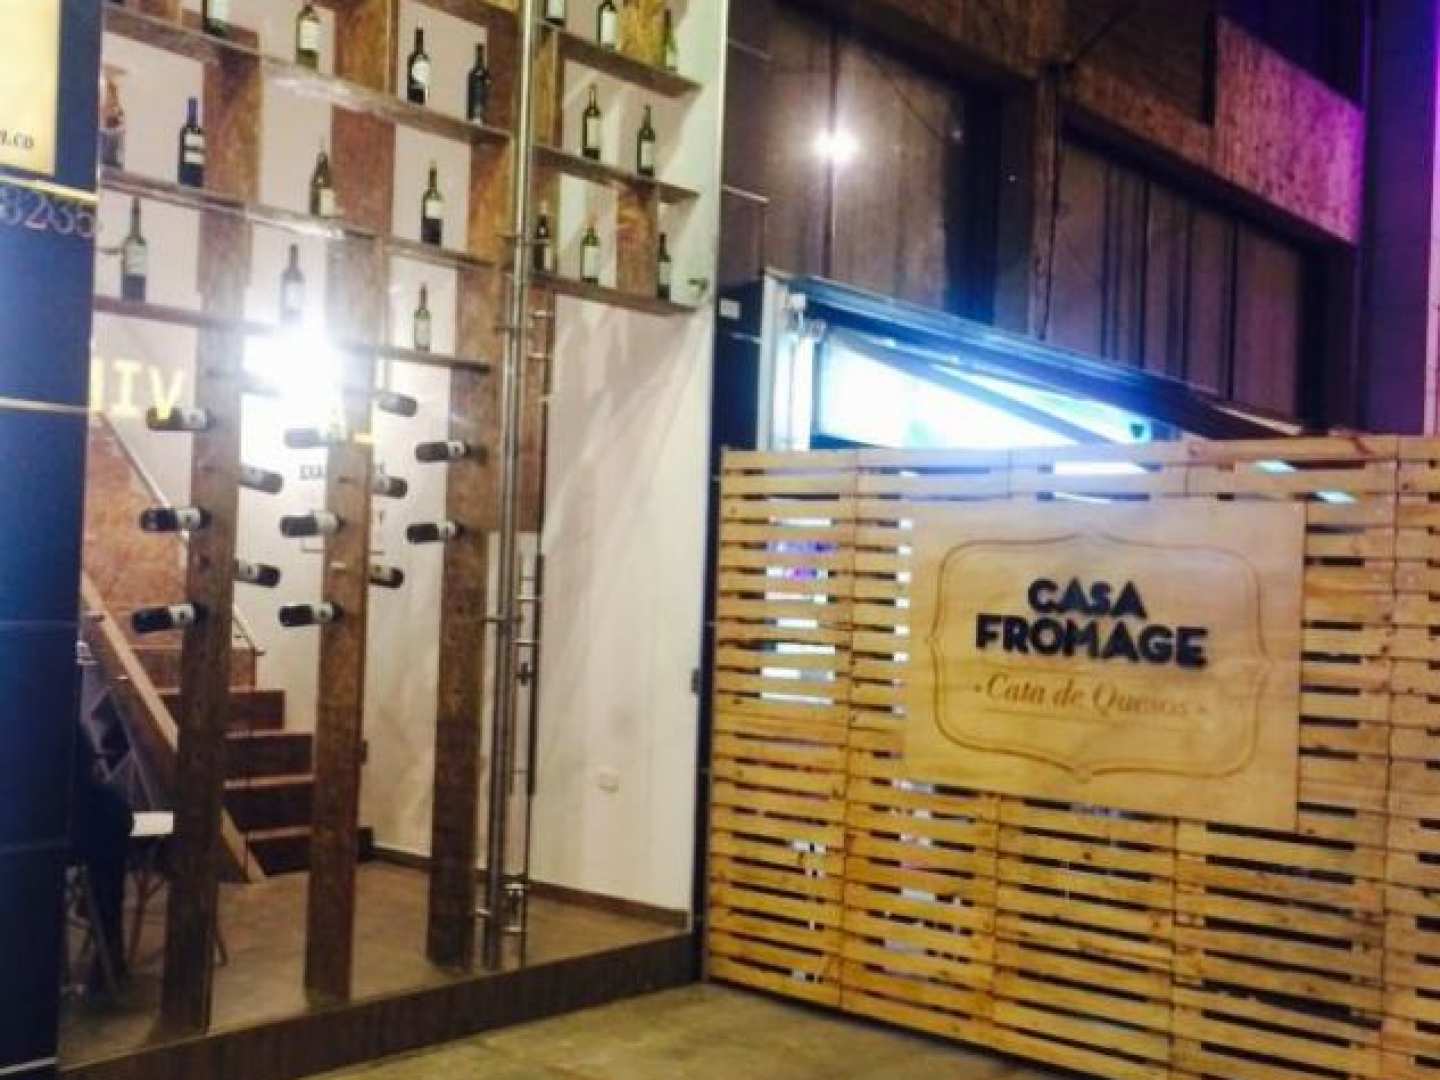 Casa Fromage